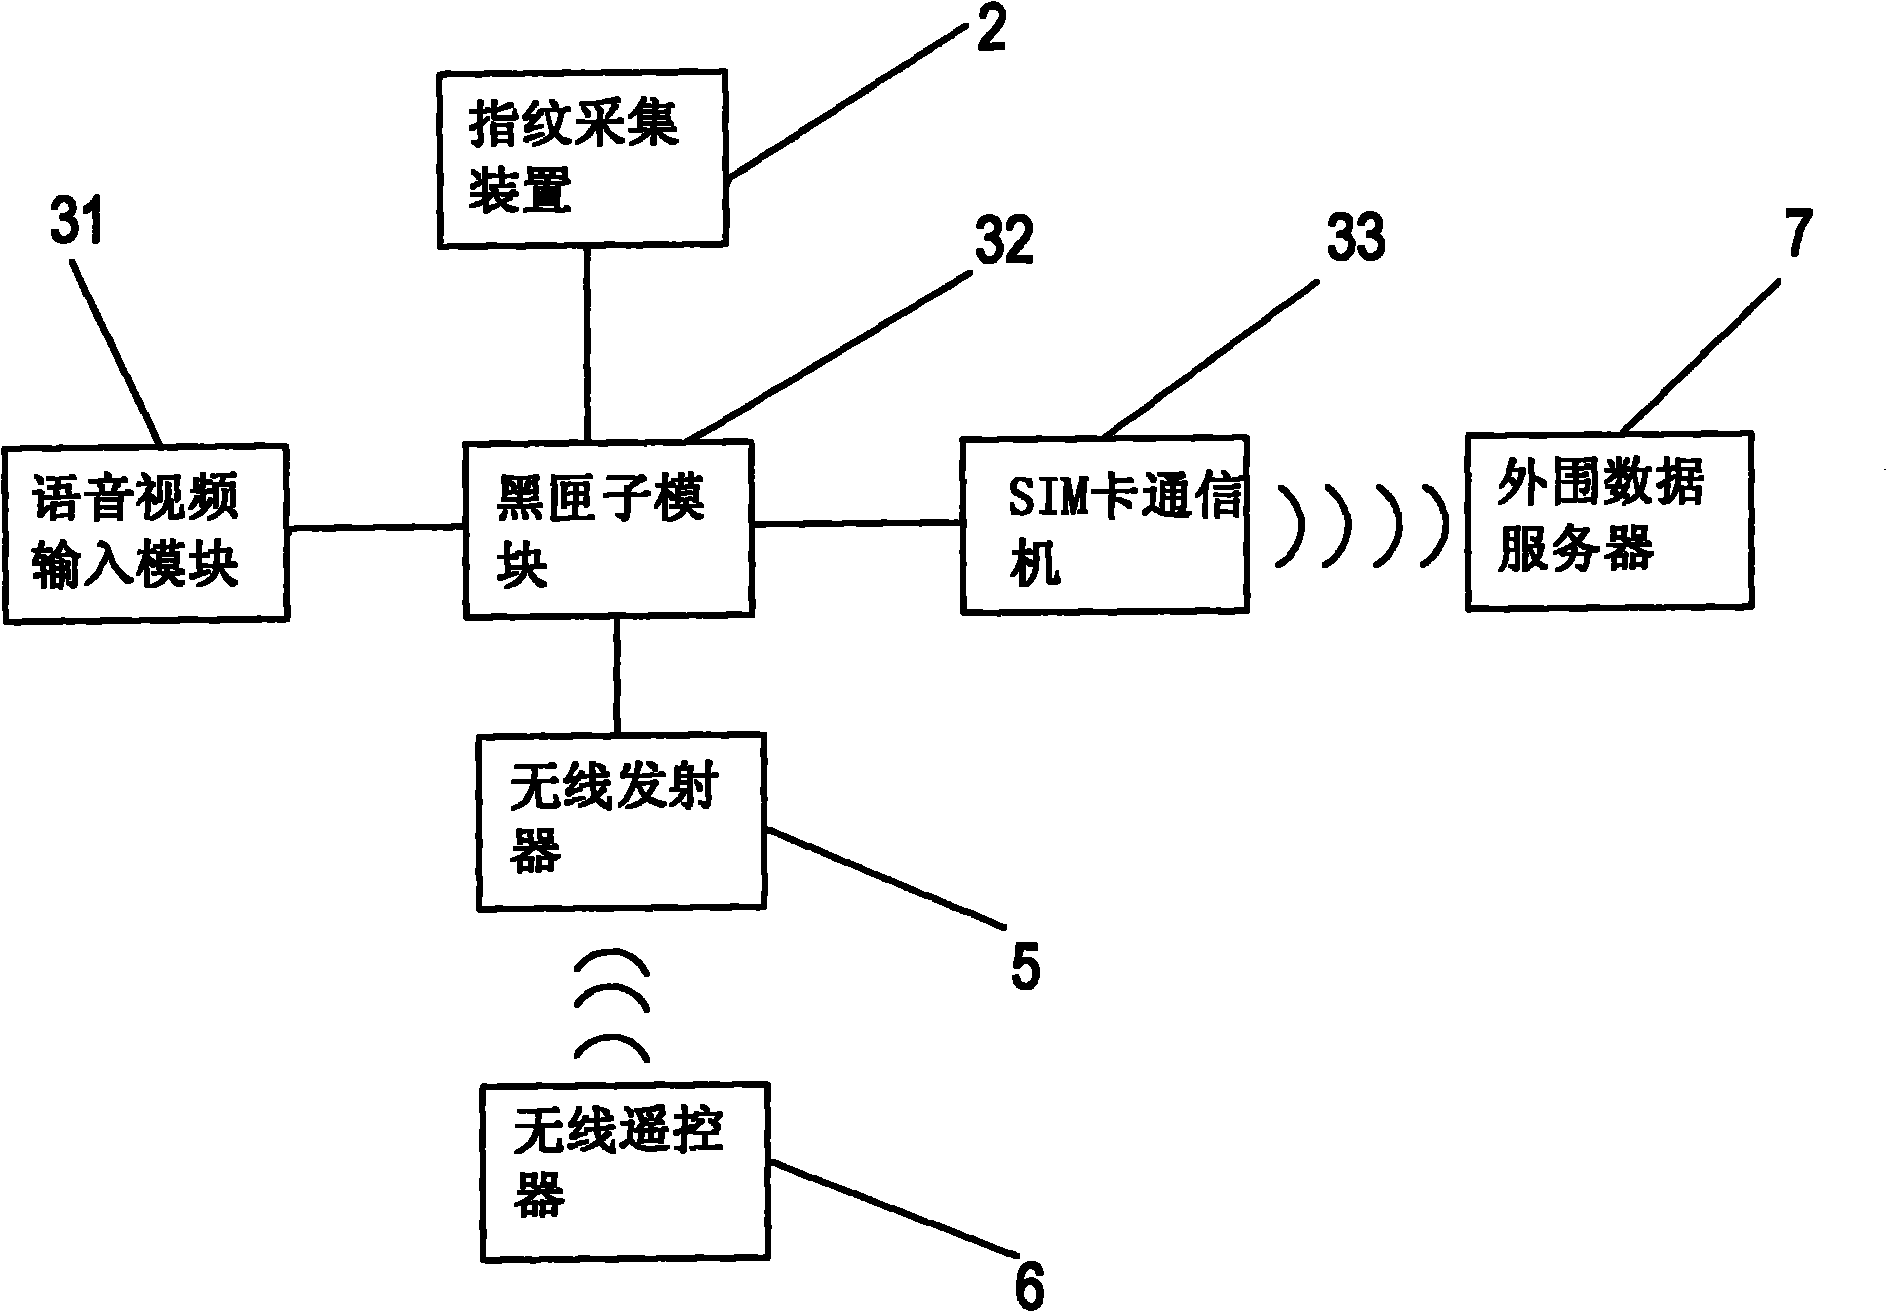 Anti-theft fingerprint lock supporting video and voice monitoring